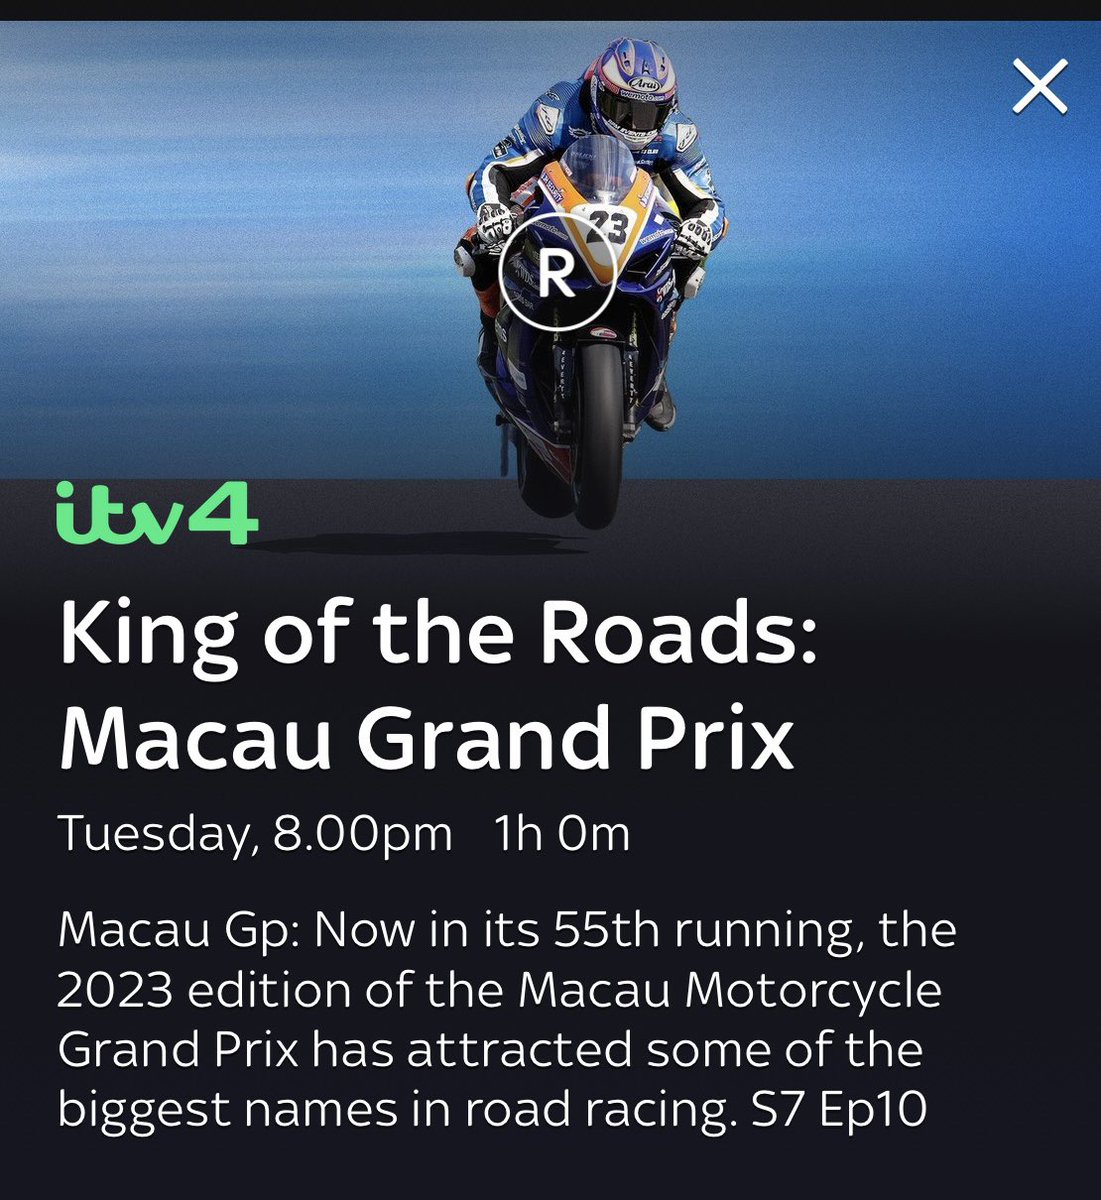 If you missed watching the #MacauGP #Superbike race a few weeks ago it’s being shown in #itv4 on Tuesday 8pm ✊🏻👍